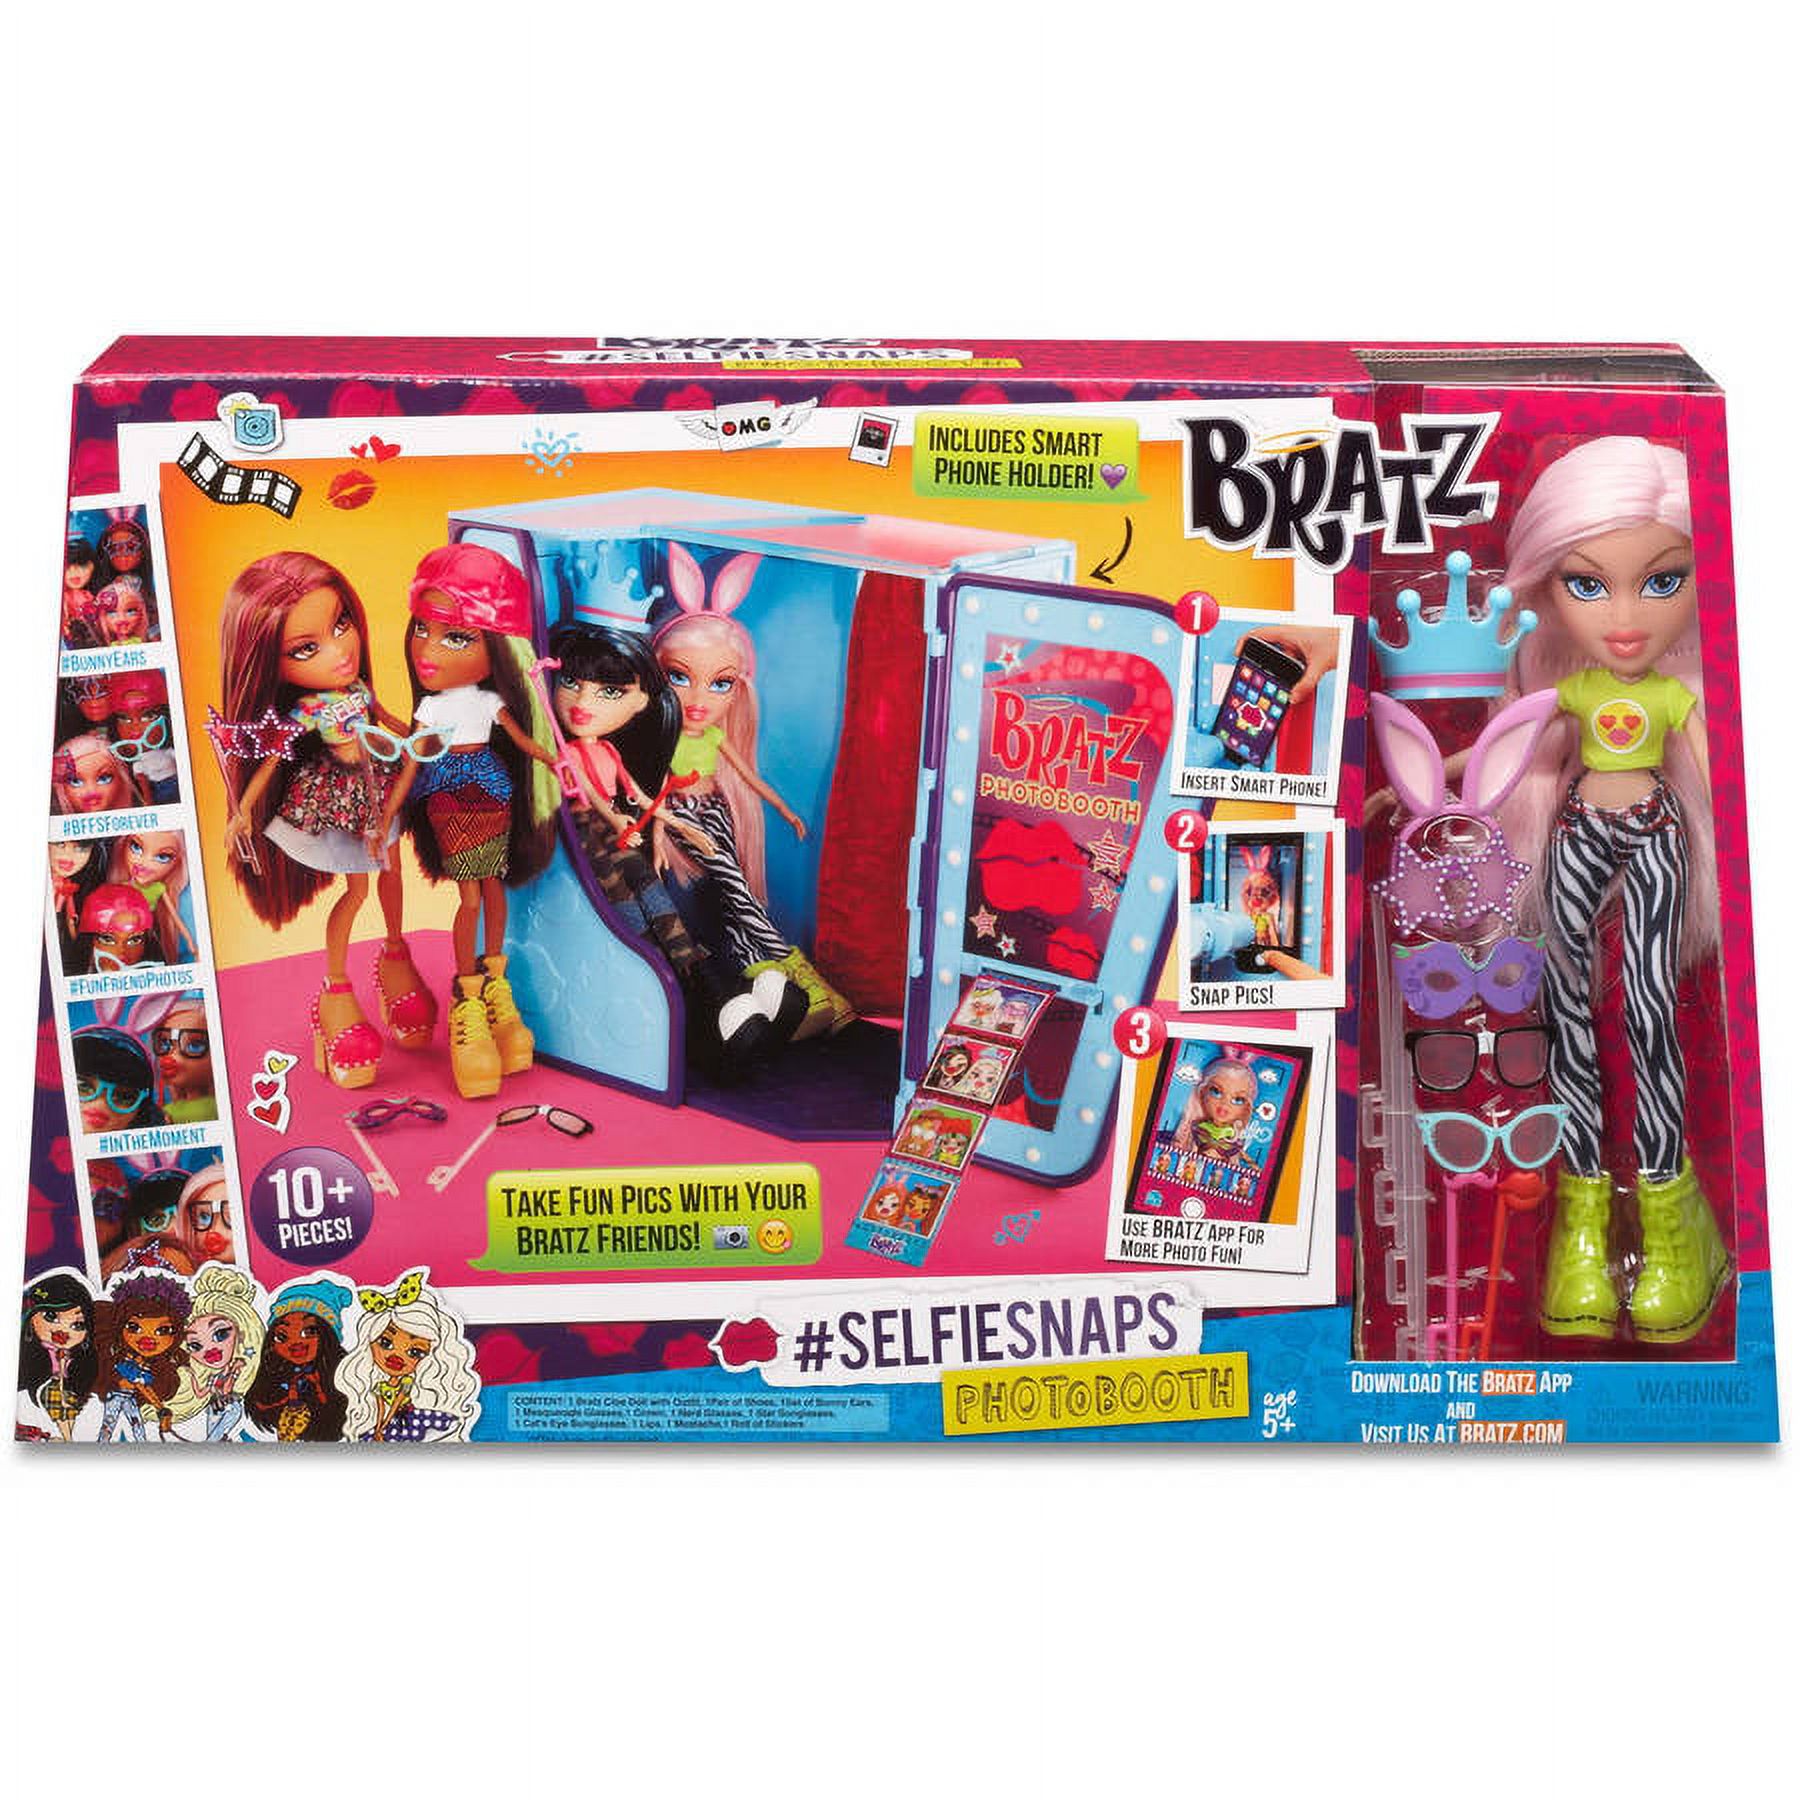 Bratz #SelfieSnaps Photobooth with Doll, Great Gift for Children Ages 6, 7, 8+ - image 4 of 5